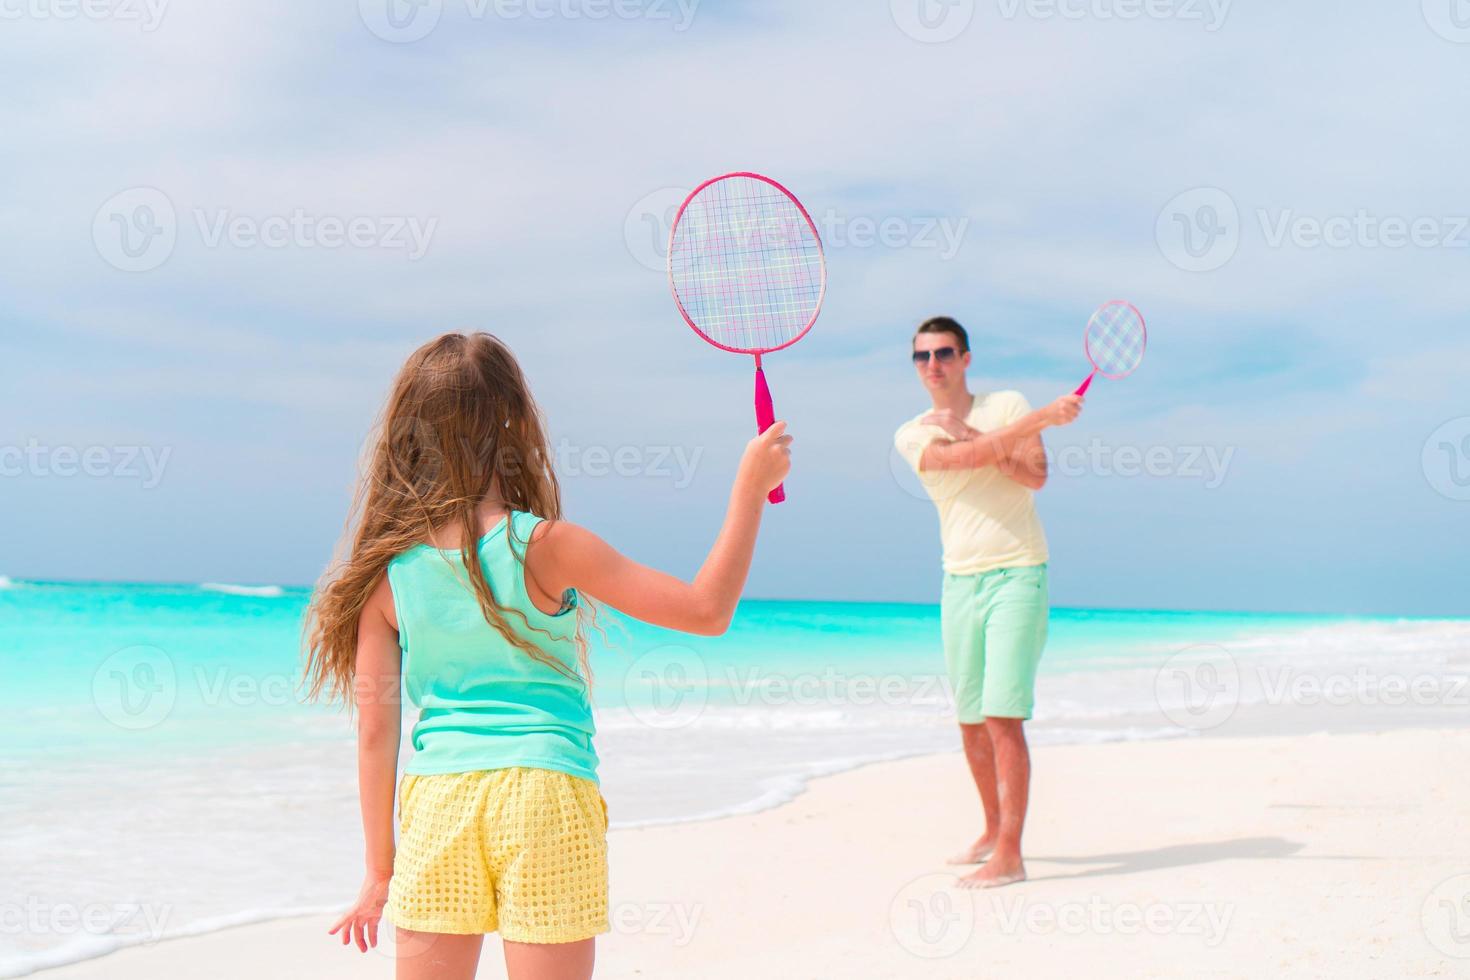 Little girl playing beach tennis on vacation with dad photo